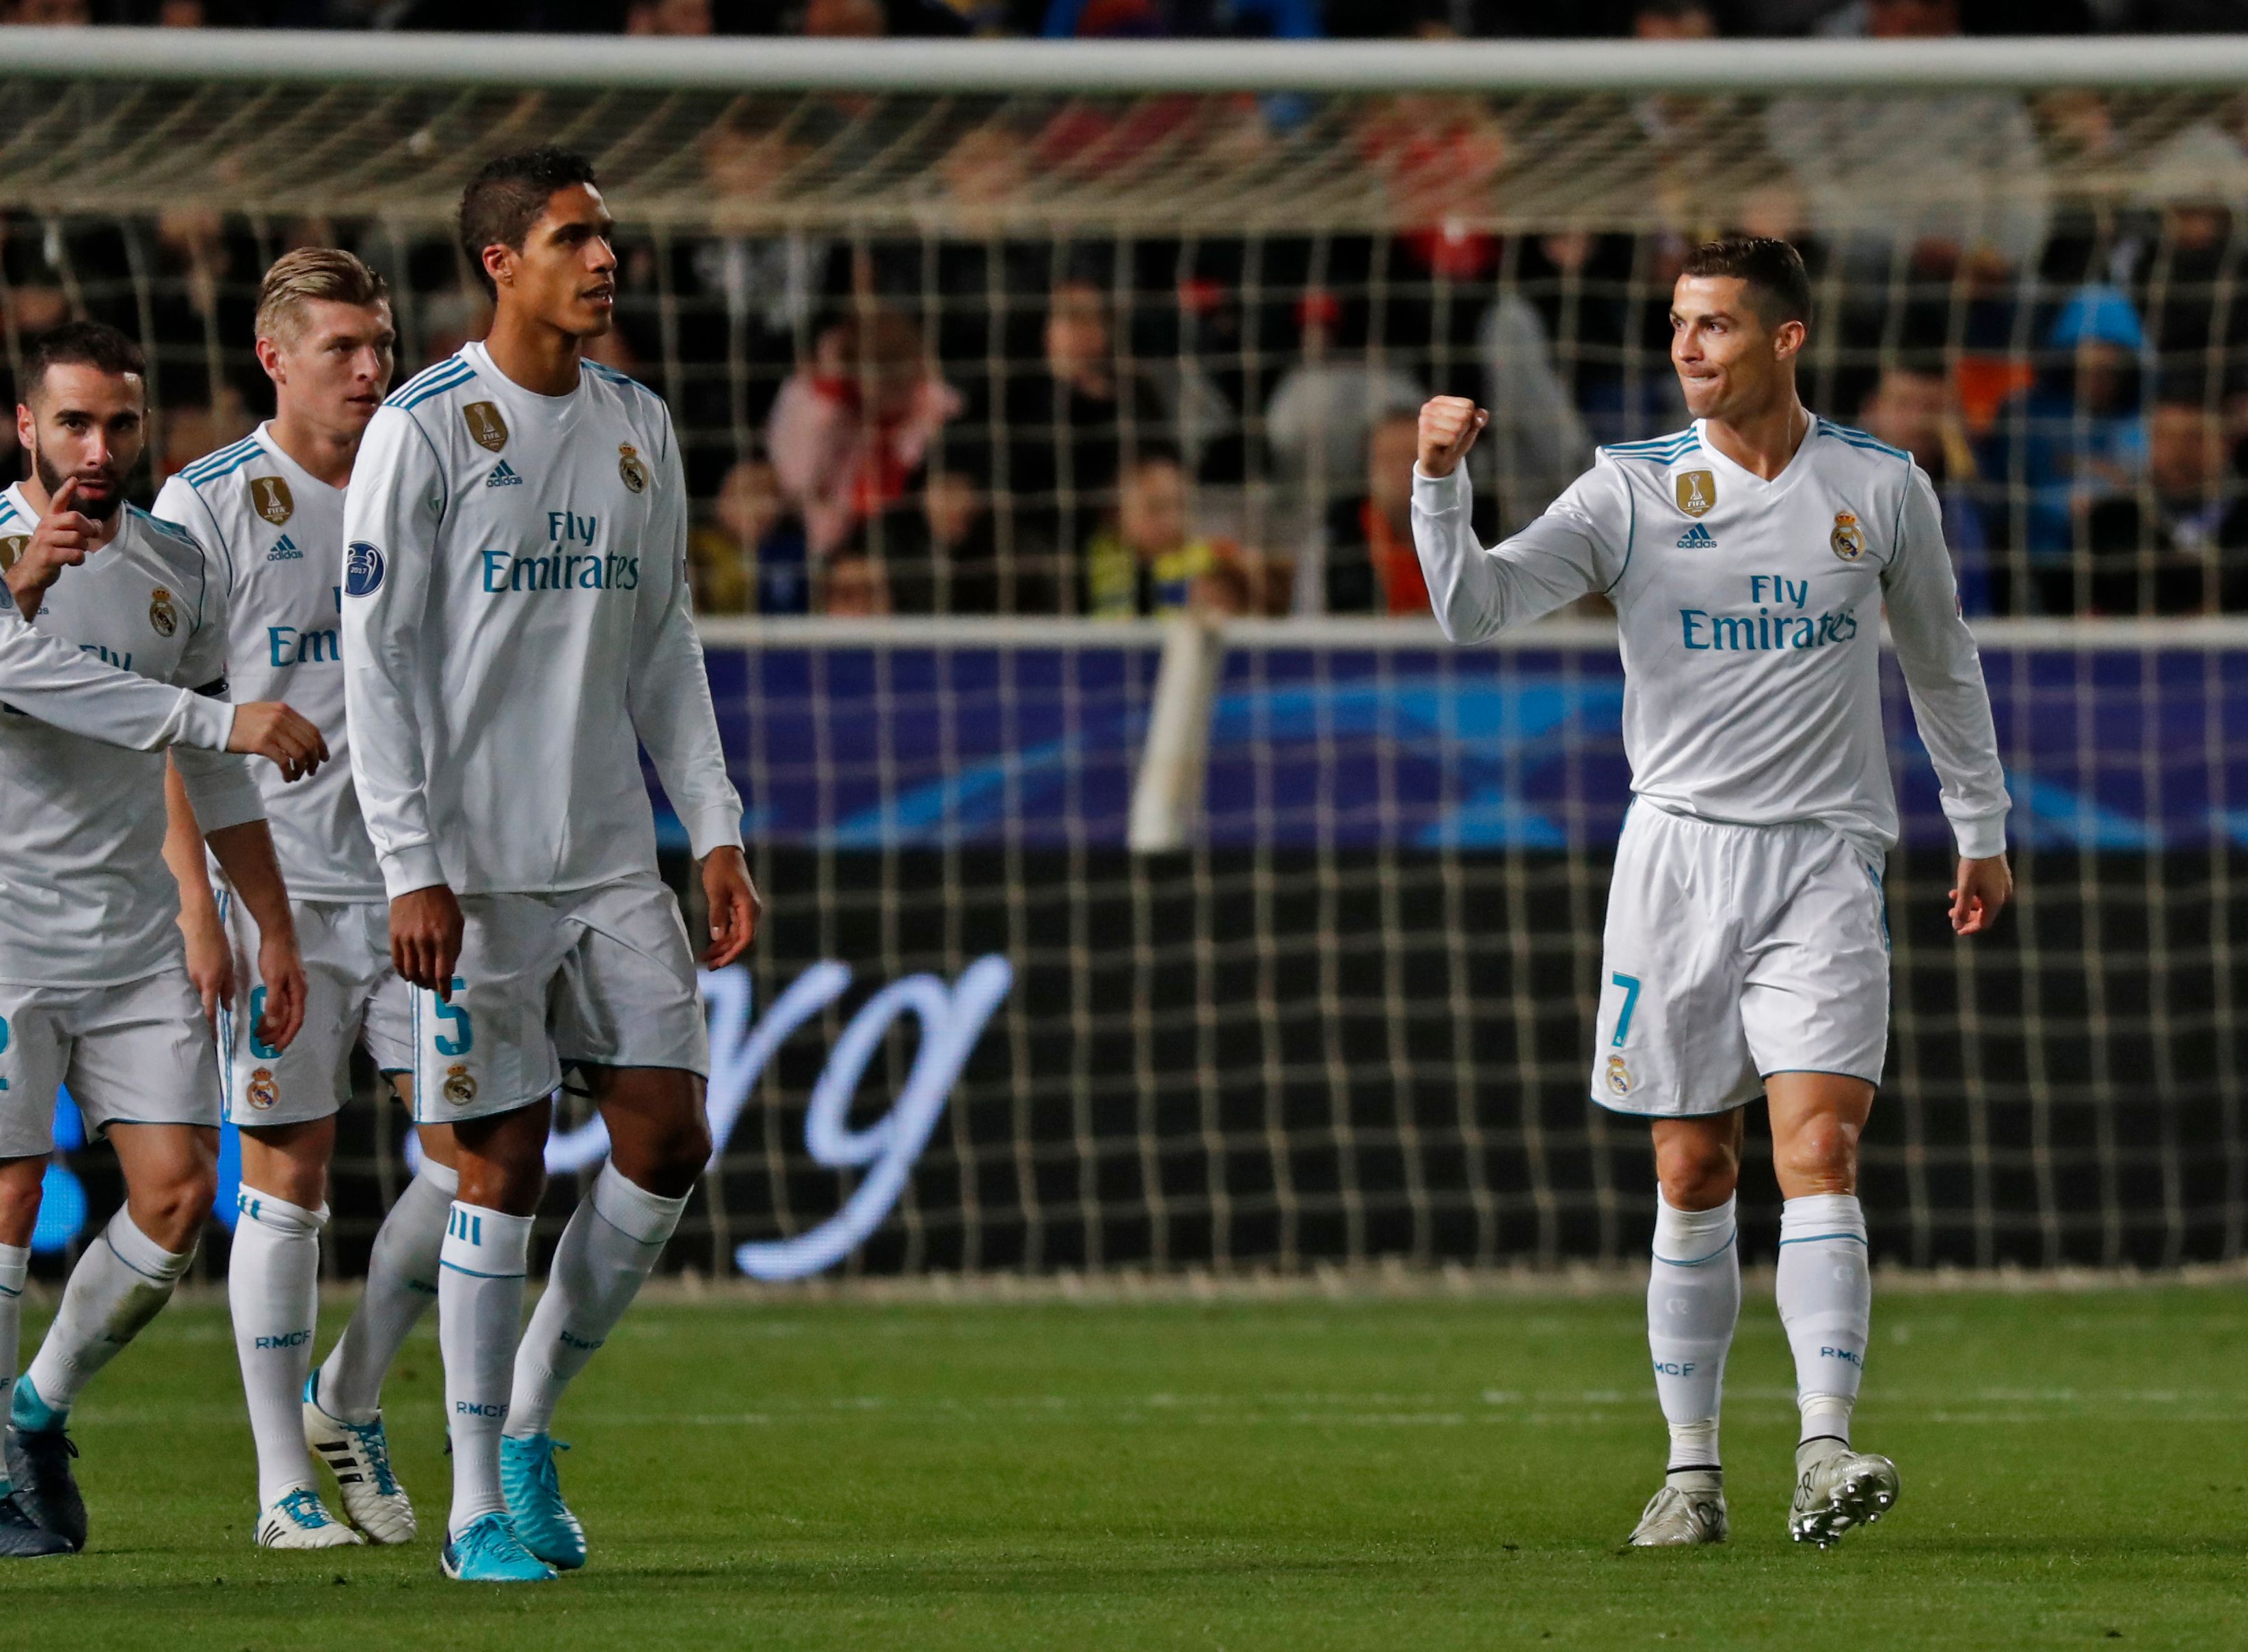 Real Madrid's Portuguese forward Cristiano Ronaldo (R) celebrates with teammates after scoring during the UEFA Champions League Group H match between Apoel FC and Real Madrid on November 21, 2017, in the Cypriot capital Nicosia's GSP Stadium.  / AFP PHOTO / Thomas COEX        (Photo credit should read THOMAS COEX/AFP/Getty Images)